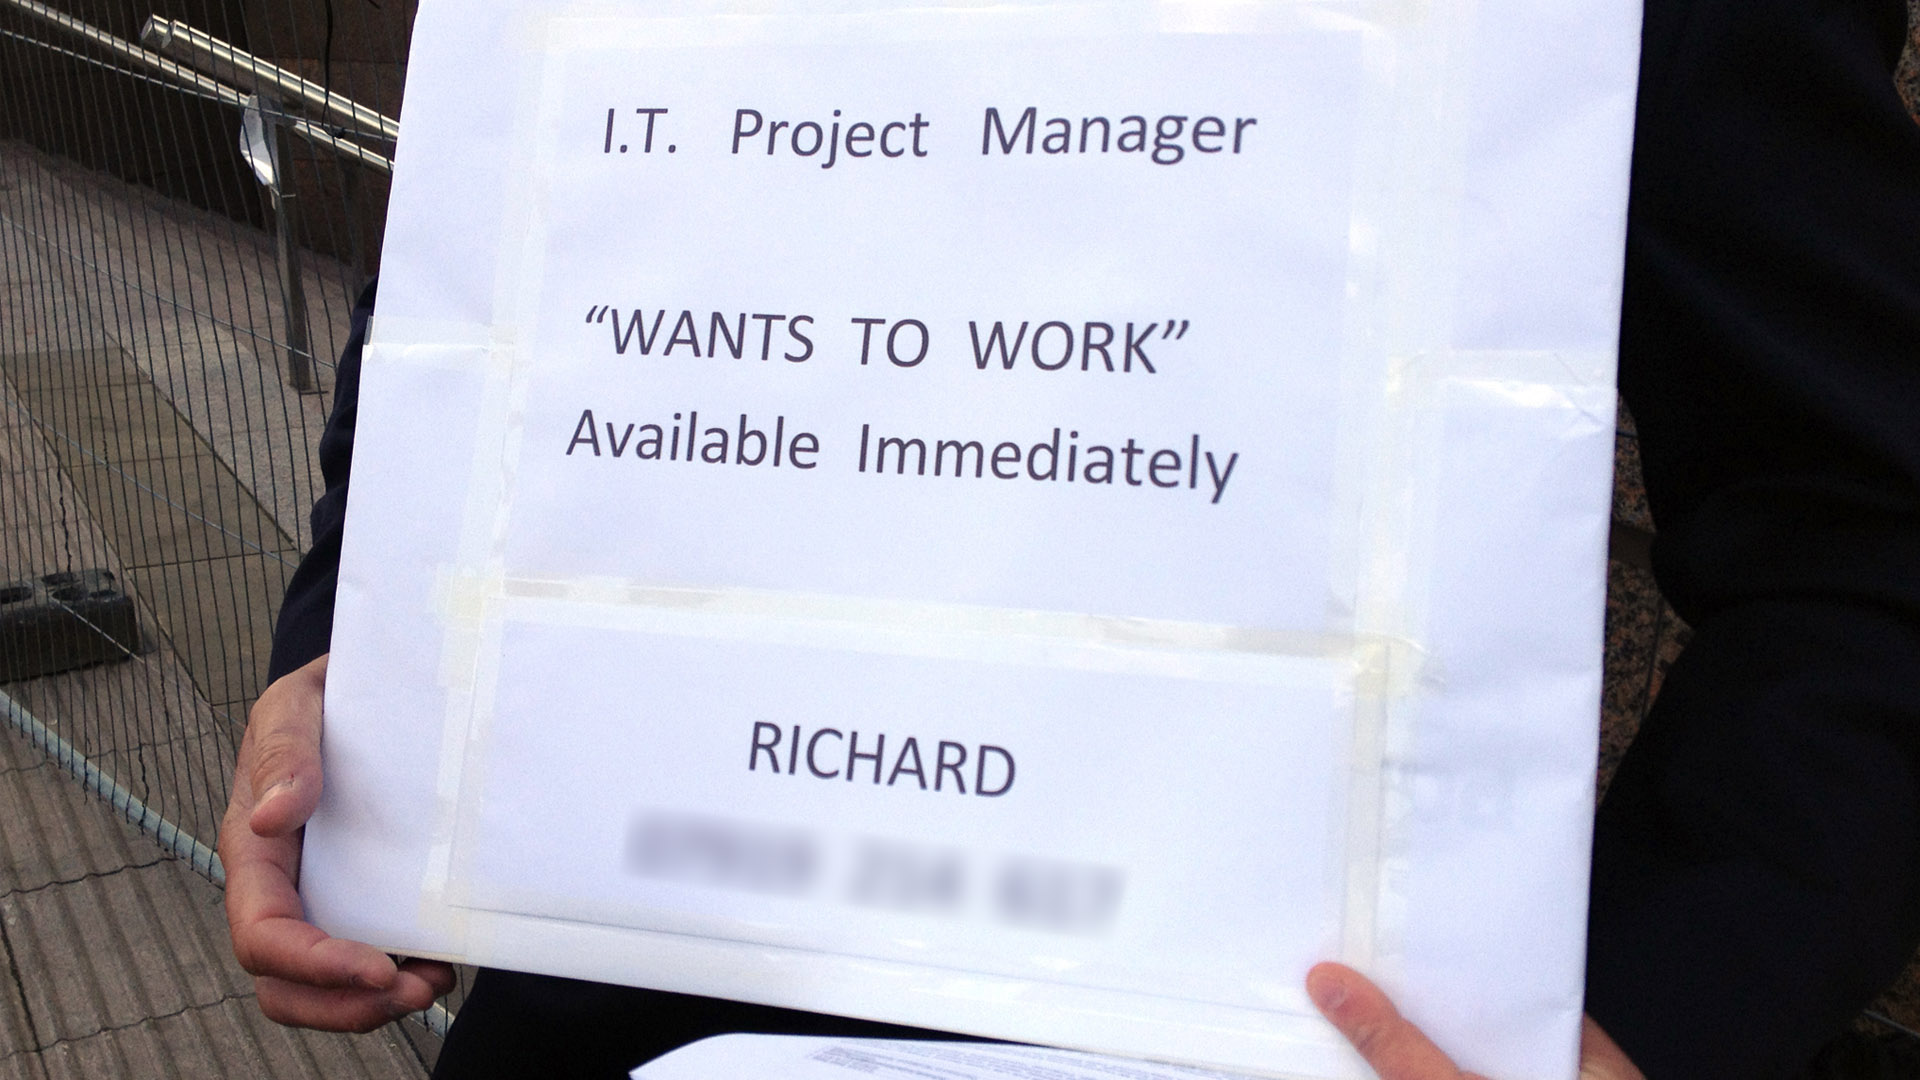 Project_images2_0008s_0001_Richard_sign_before_blur